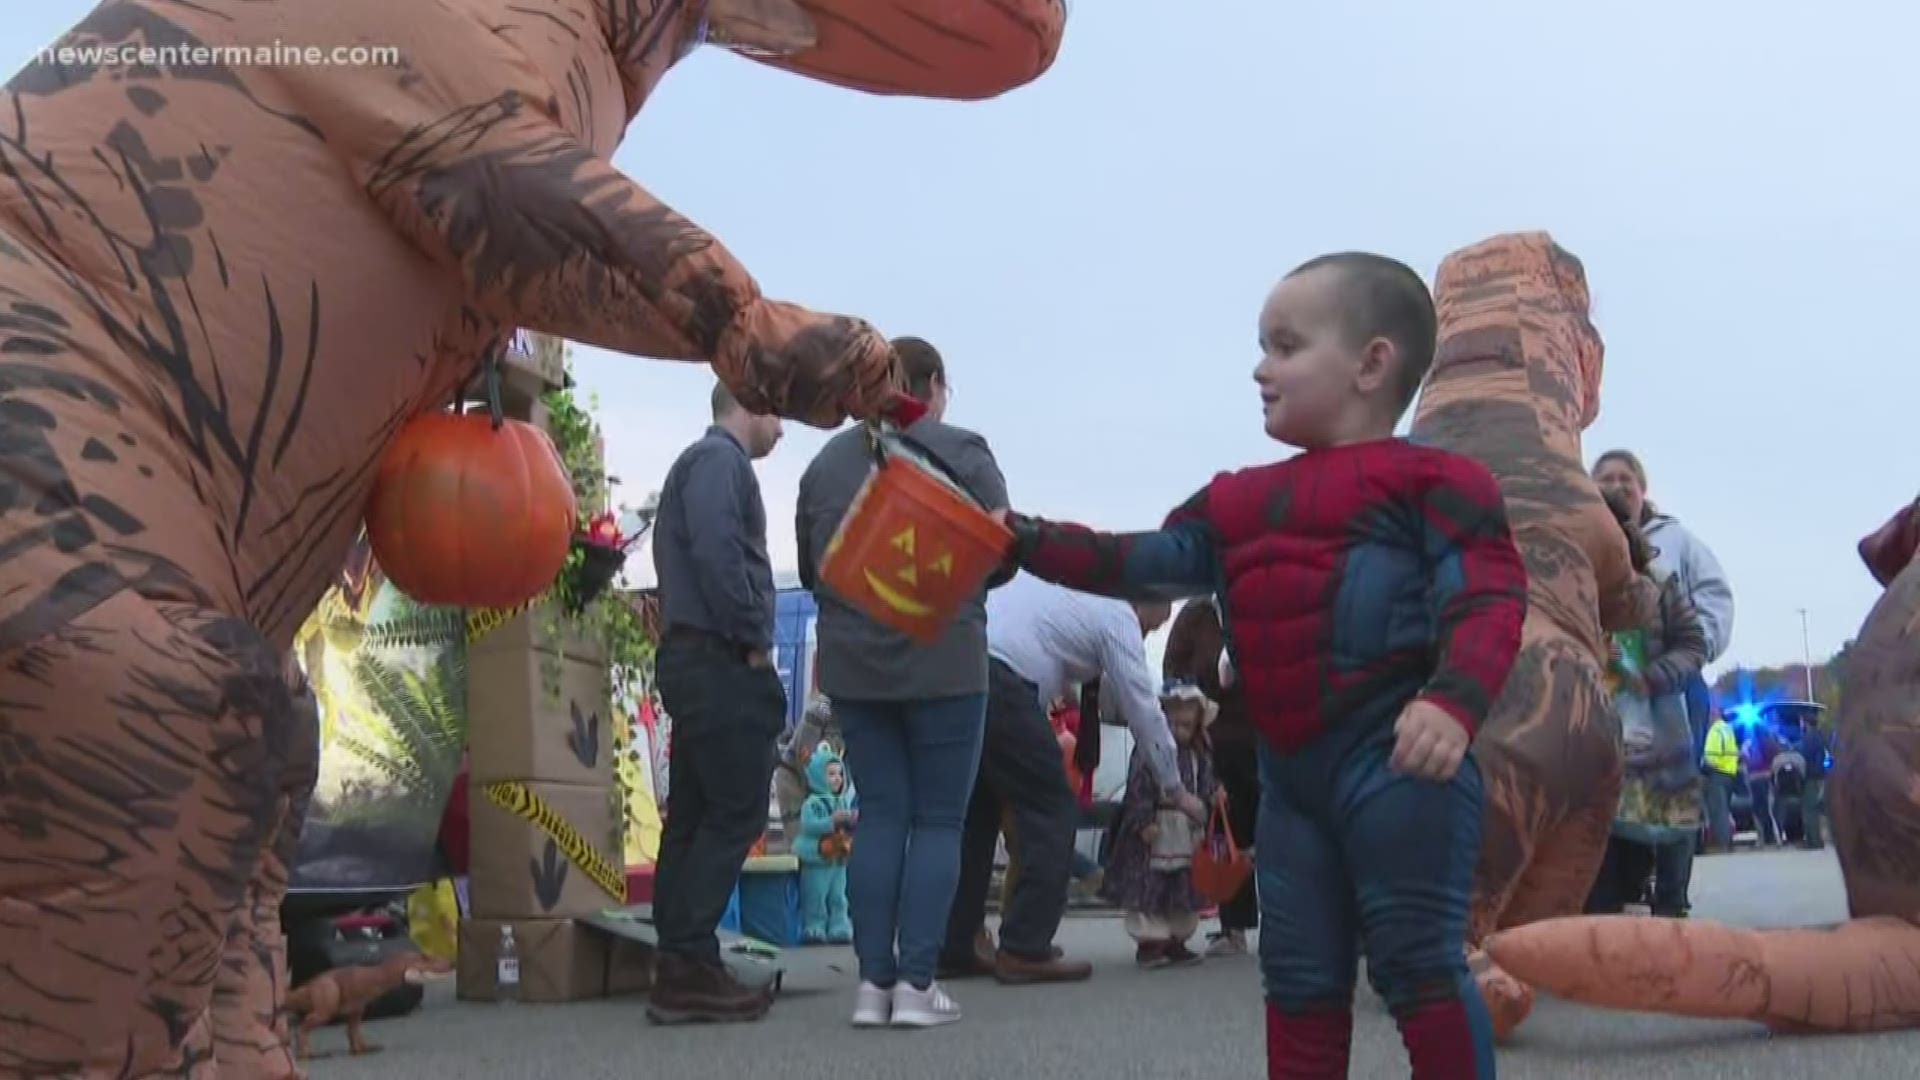 Halloween comes early for boy with rare disease in Augusta